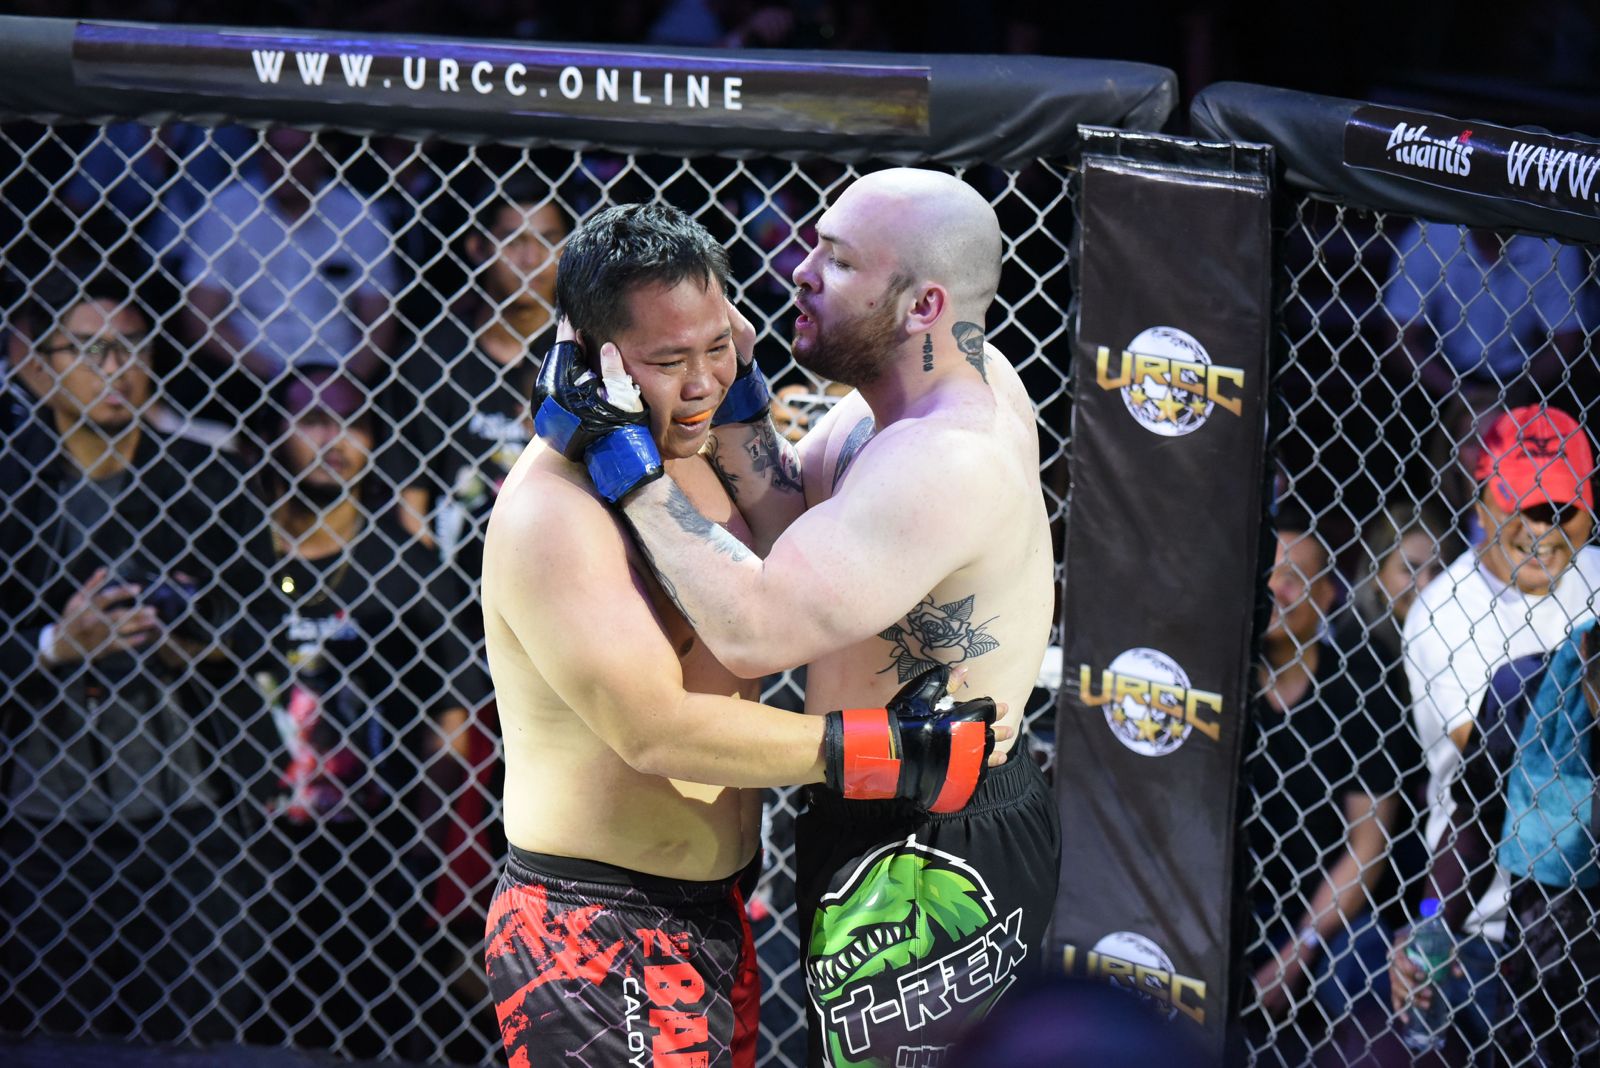 Pinoy Caloy Baduria retires after submission loss to Mariano Jones in URCC 86